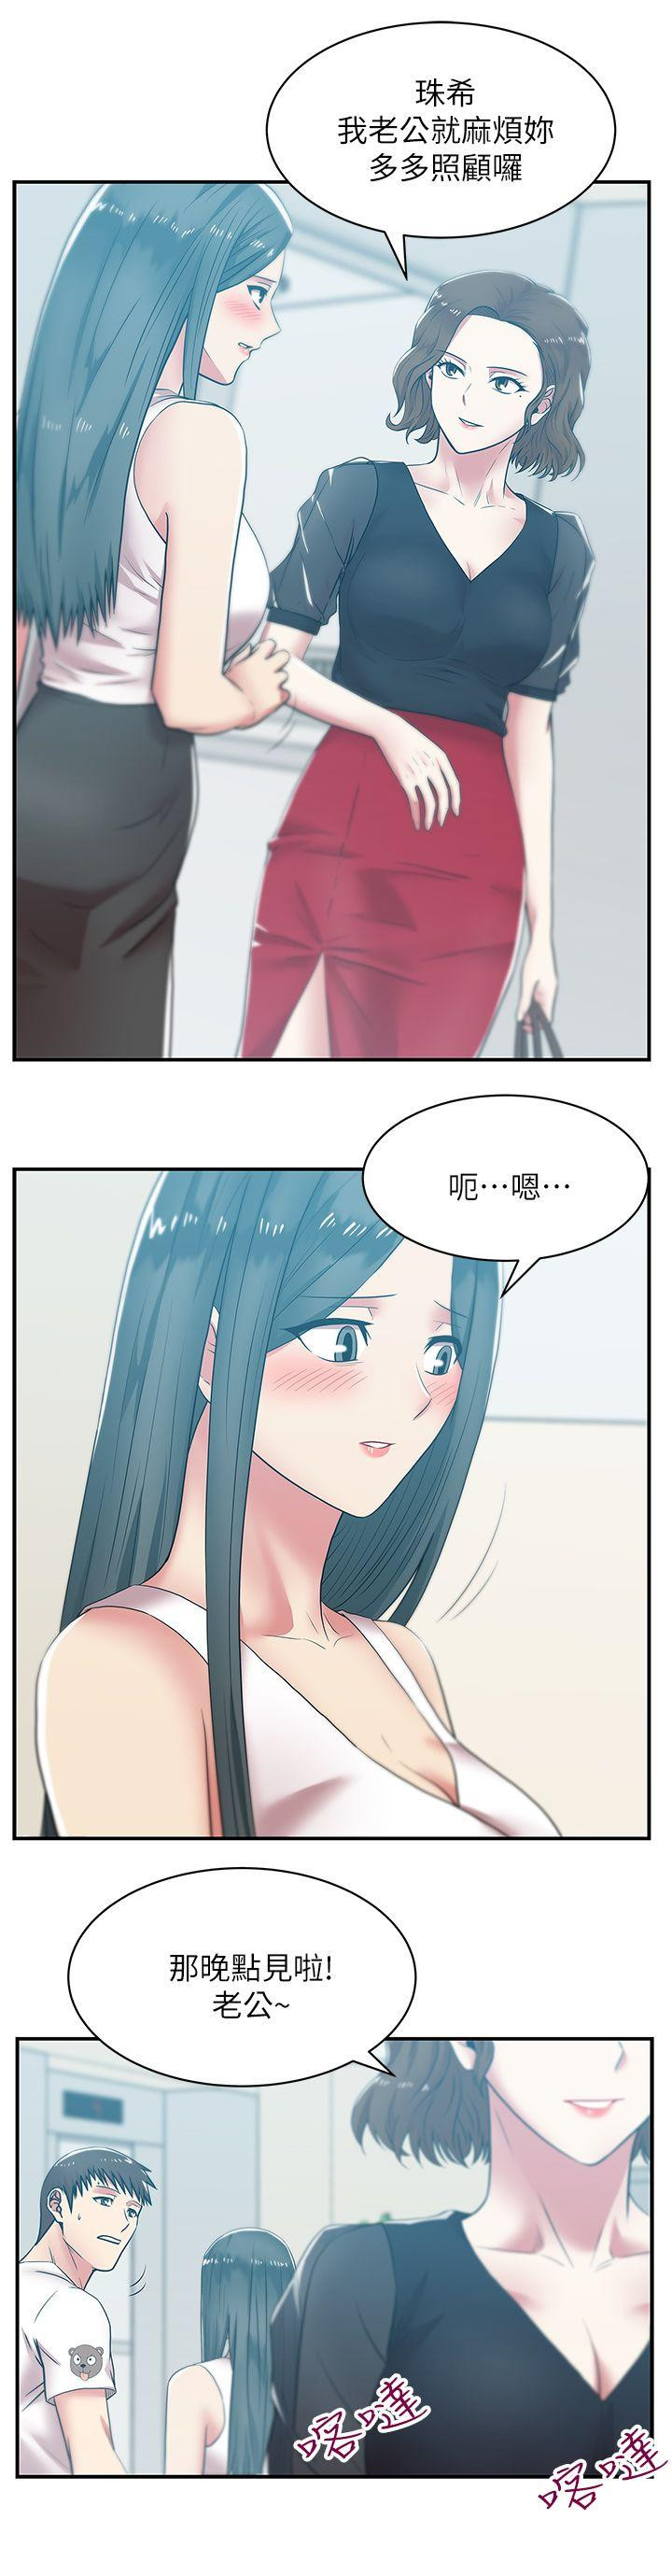 Wifes Friend Raw - Chapter 32 Page 8